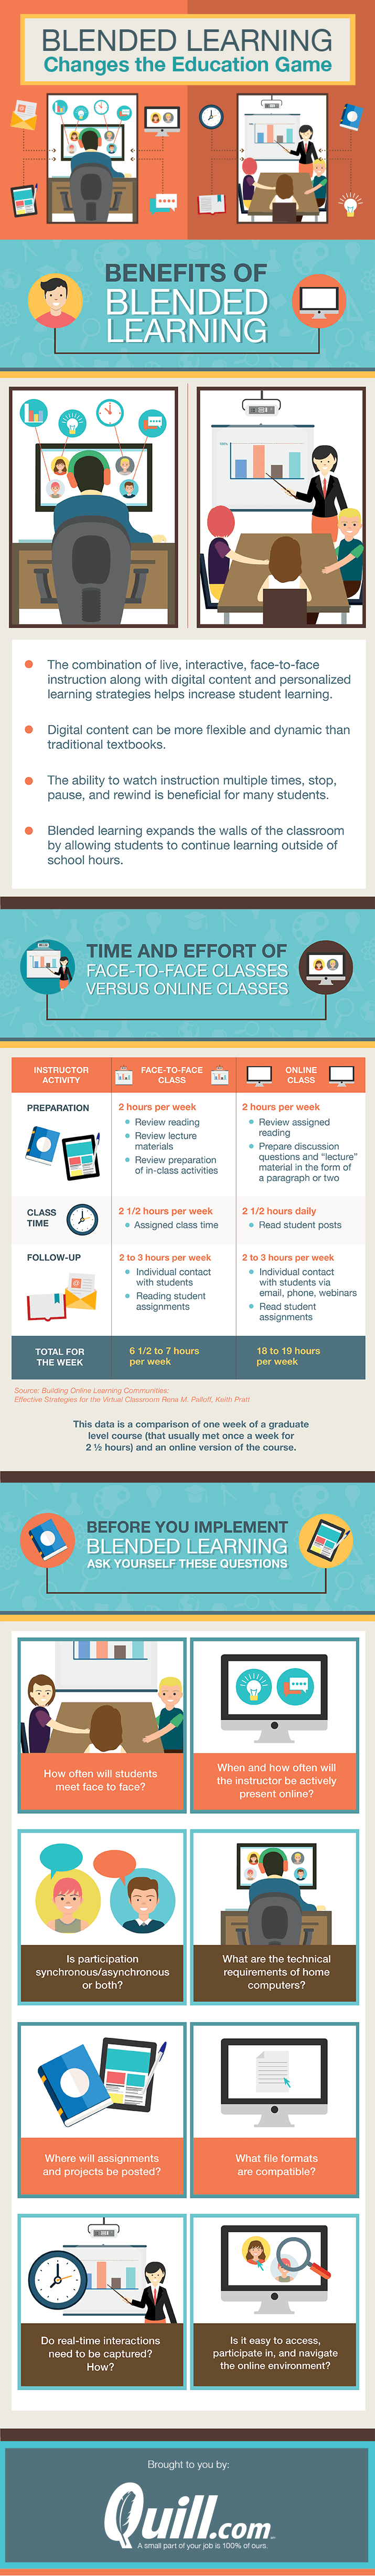 6 Common Misconceptions About Blended Learning Infographic